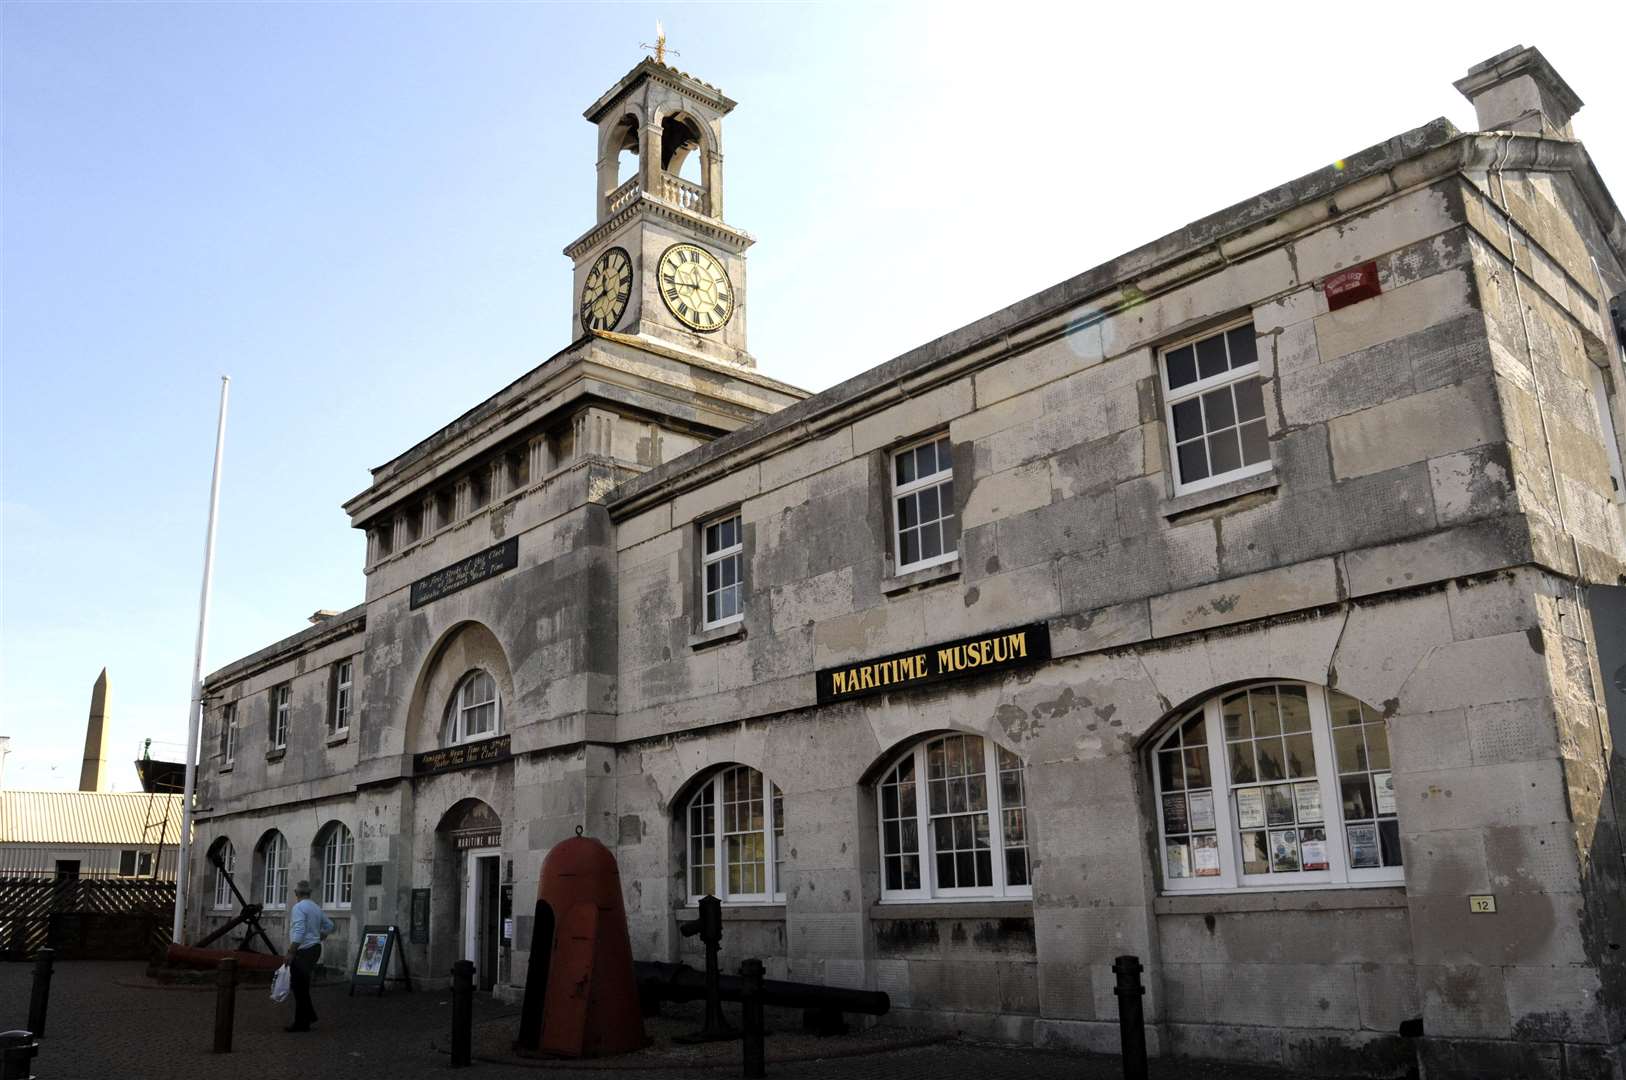 Crews battled the fire at Ramsgate's Maritime Museum yesterday afternoon